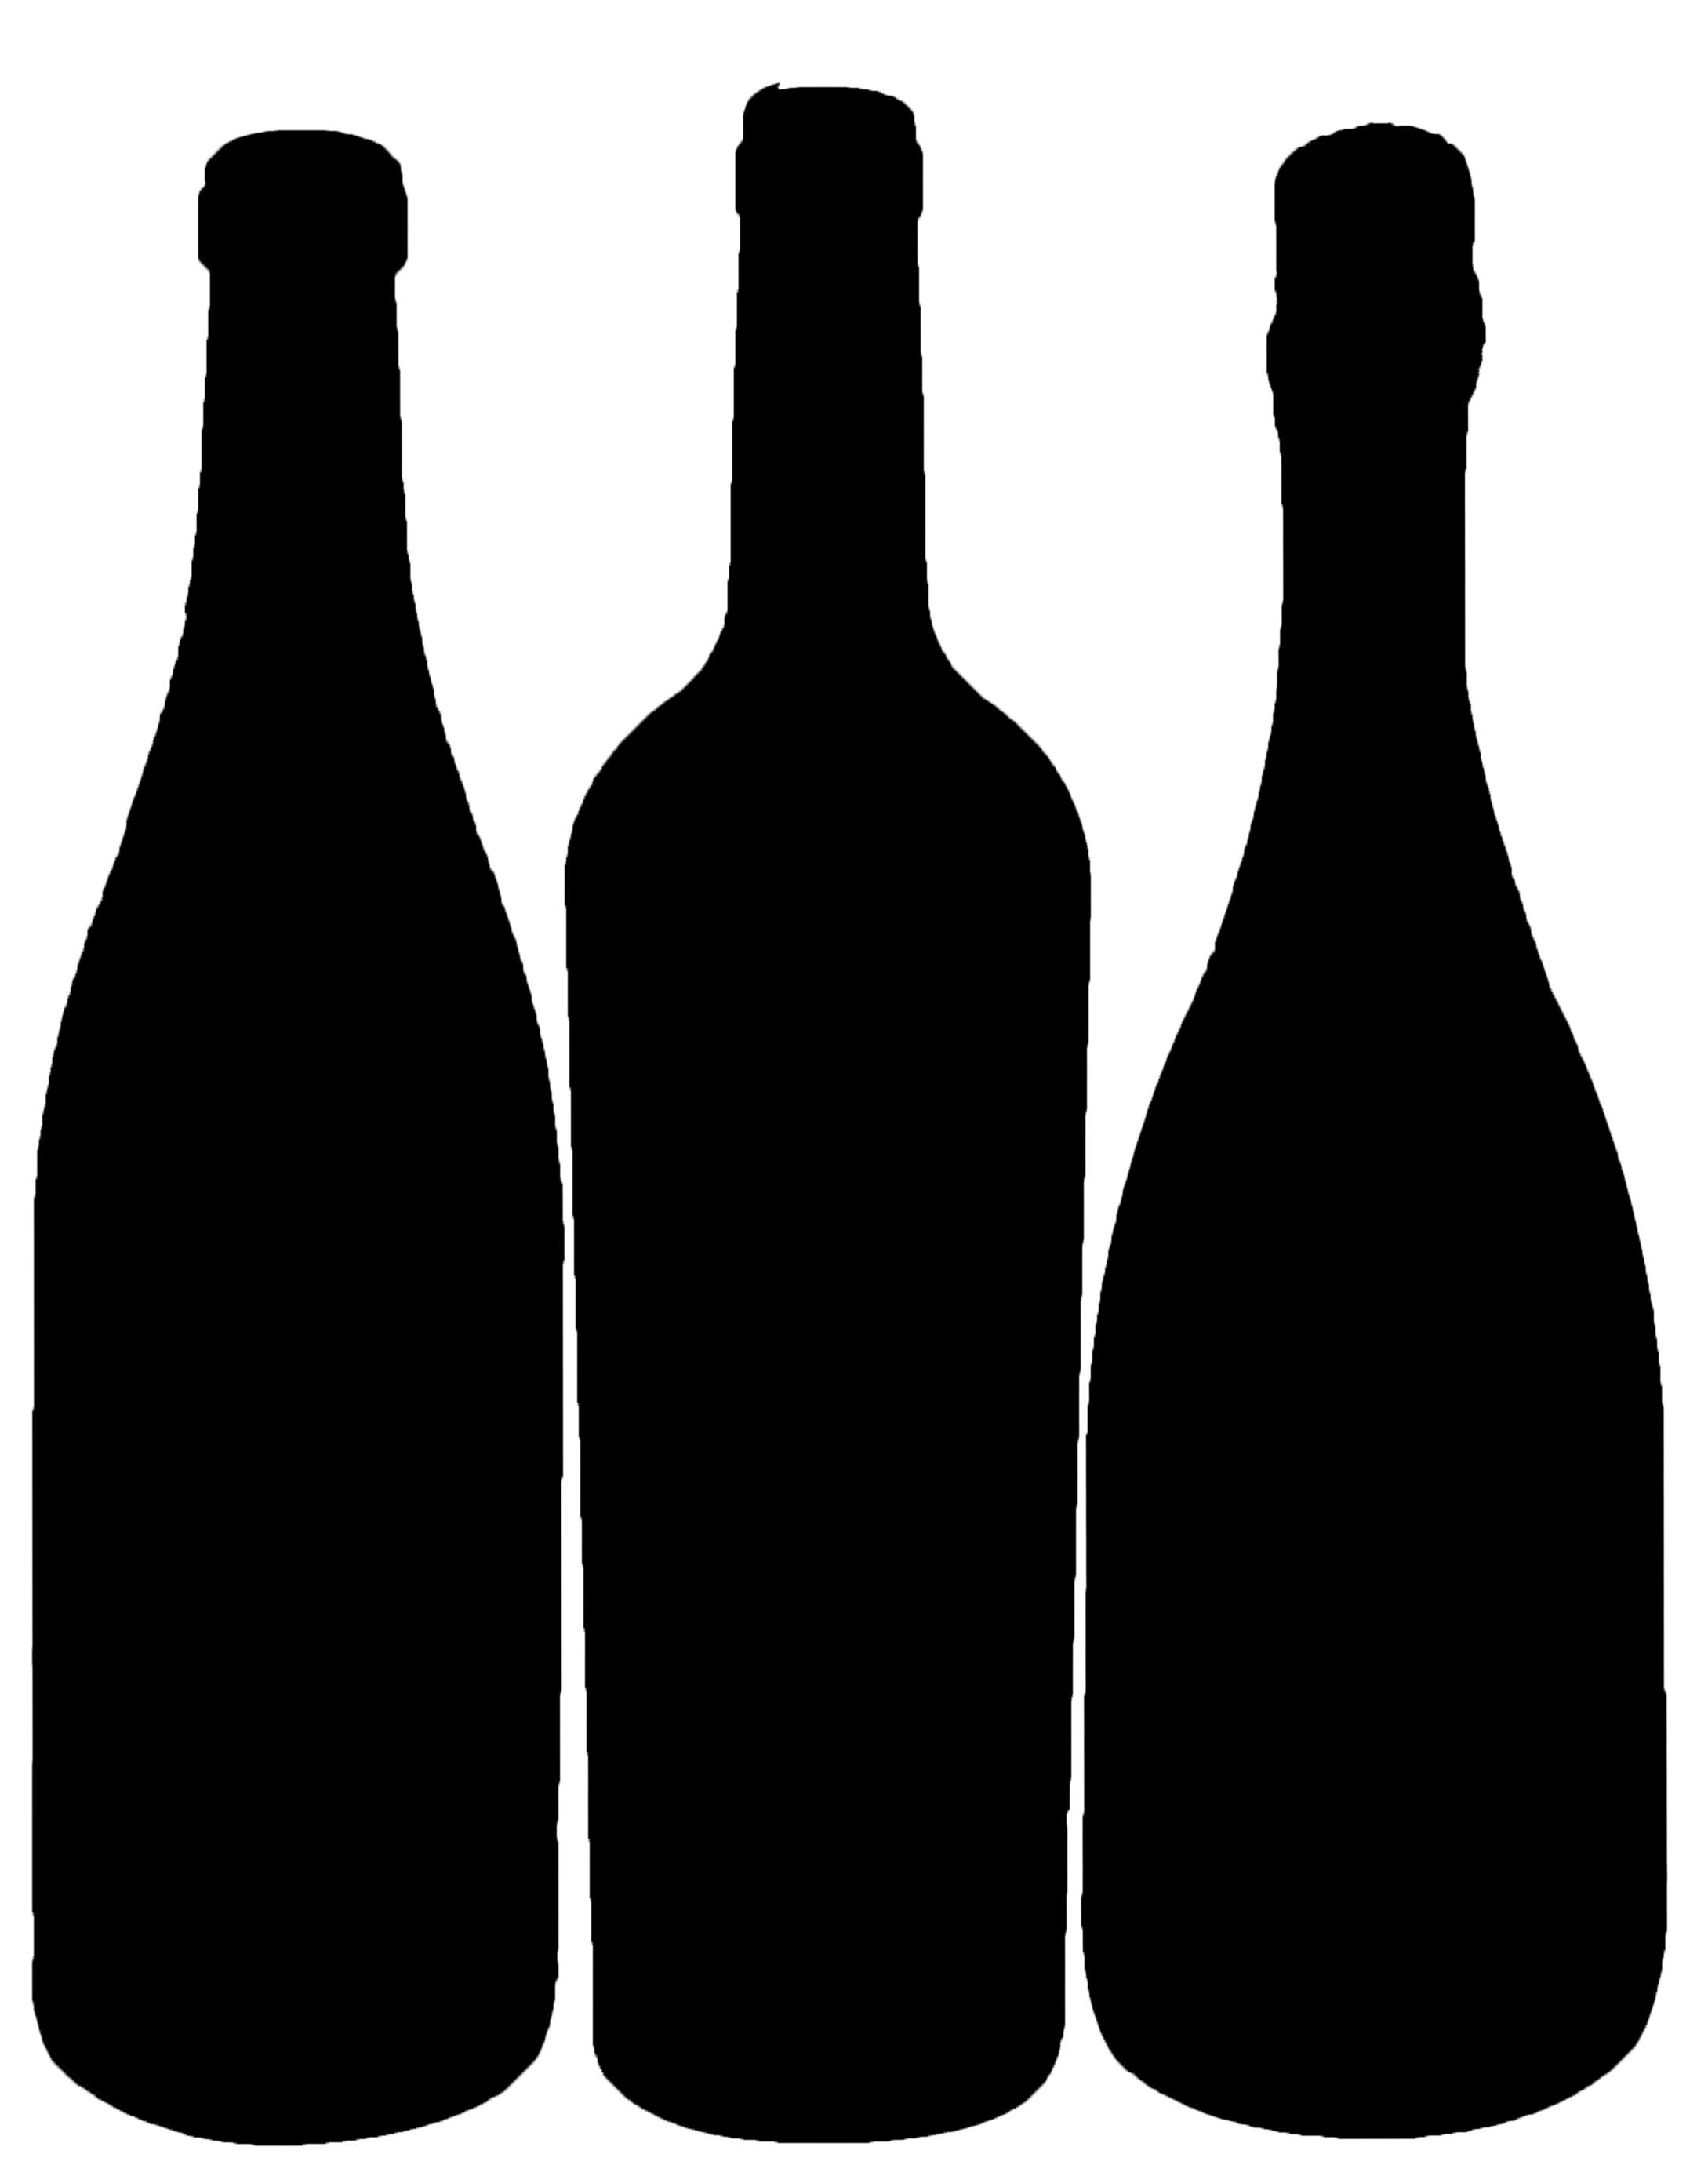 Best Free Beer Bottle Silhouette Clipart With Drawing